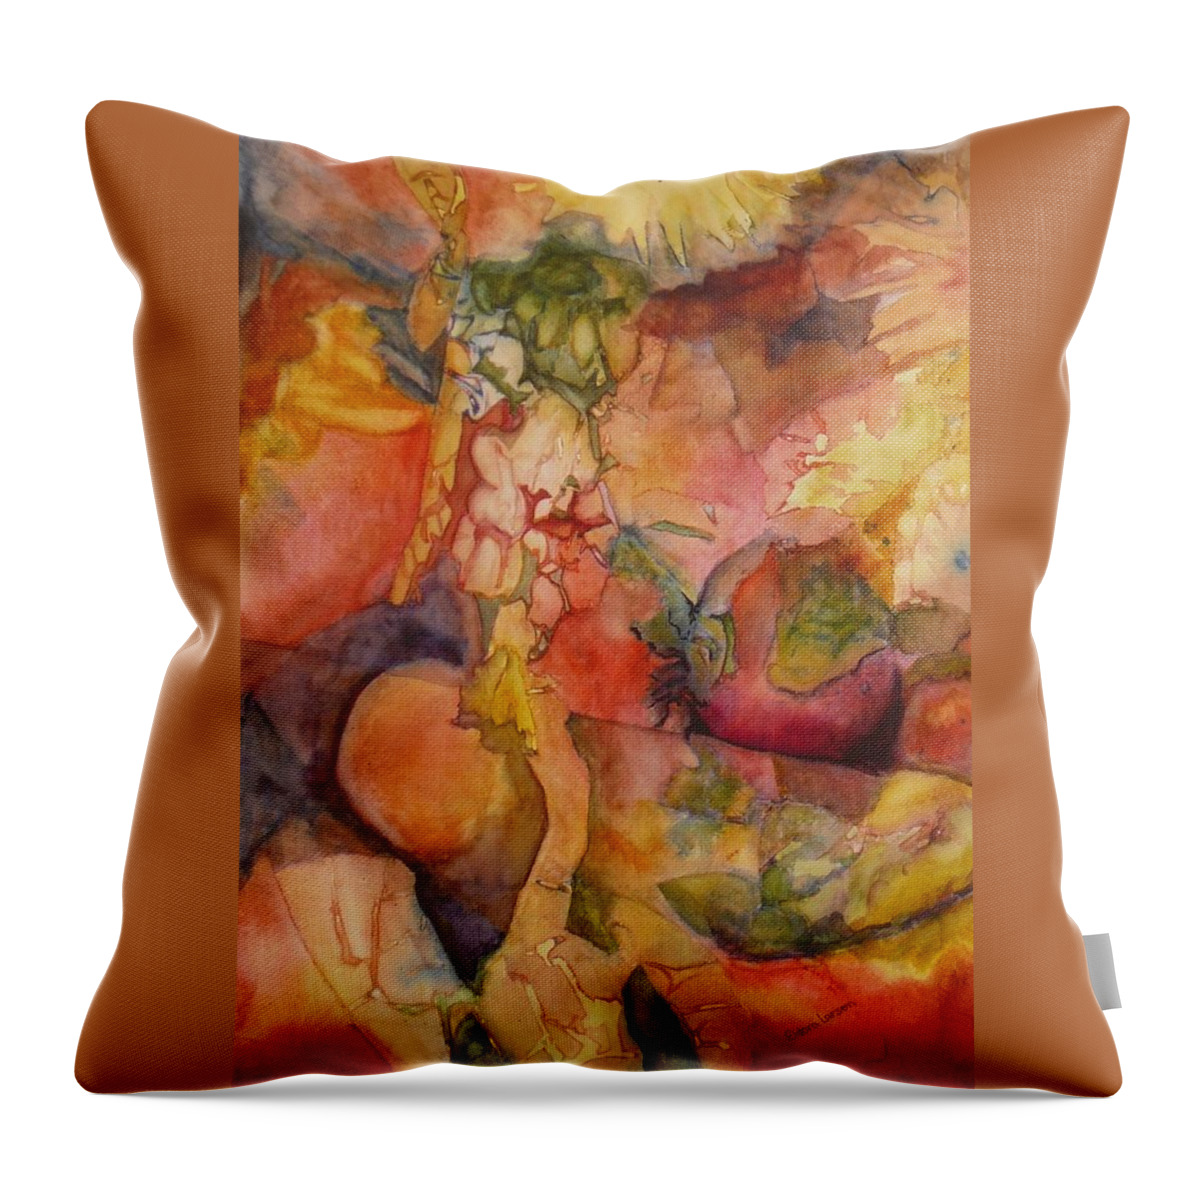 Vegetables Throw Pillow featuring the painting Fertility by Eldora Schober Larson